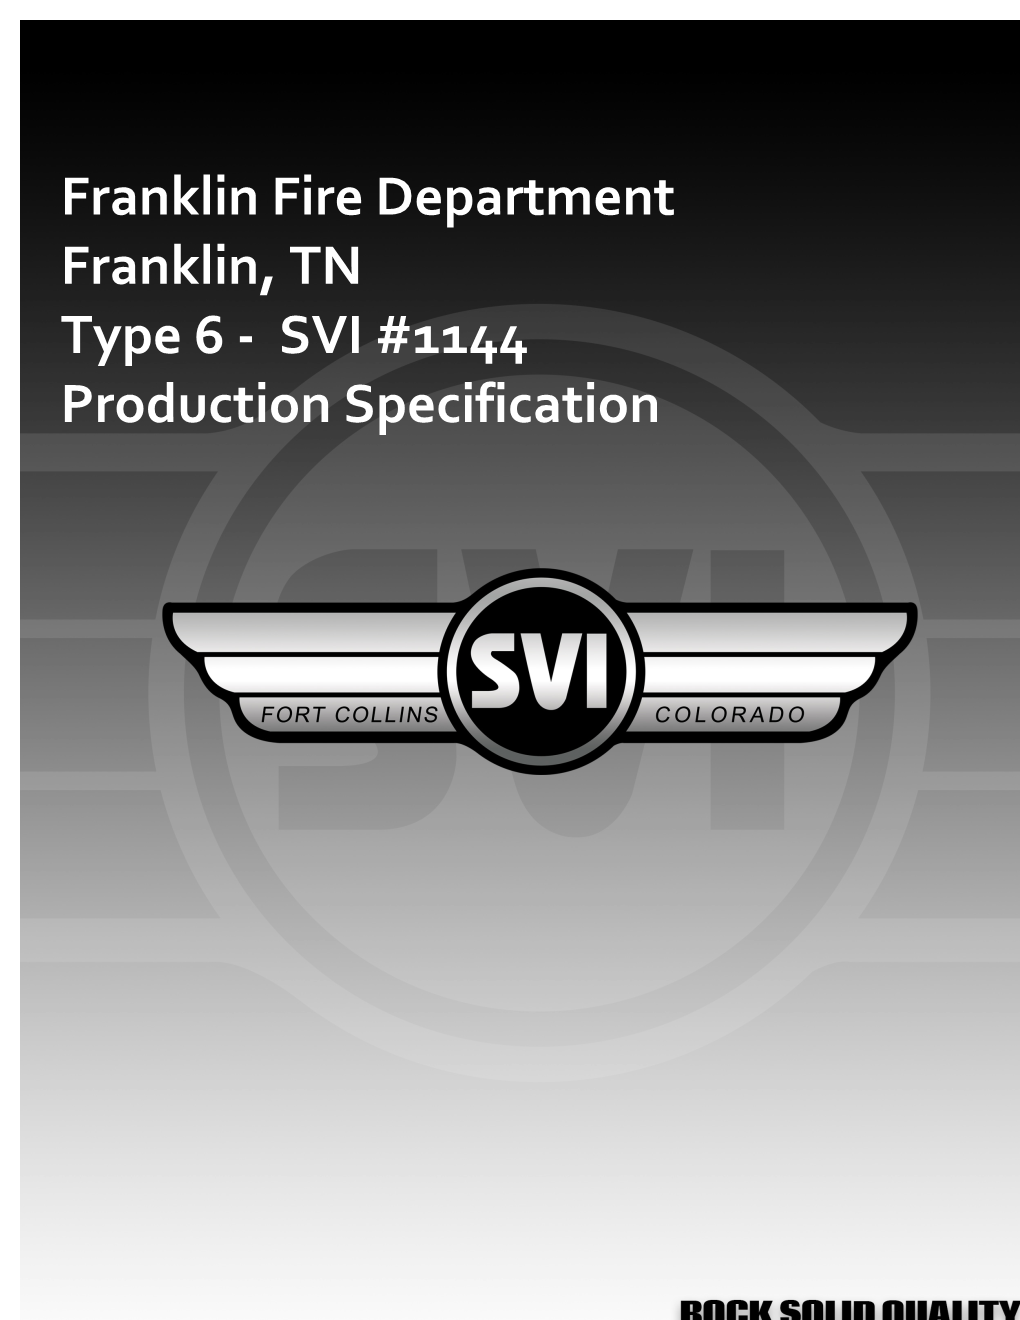 Franklin Fire Department Franklin, TN Type 6 - SVI #1144 Production Specification